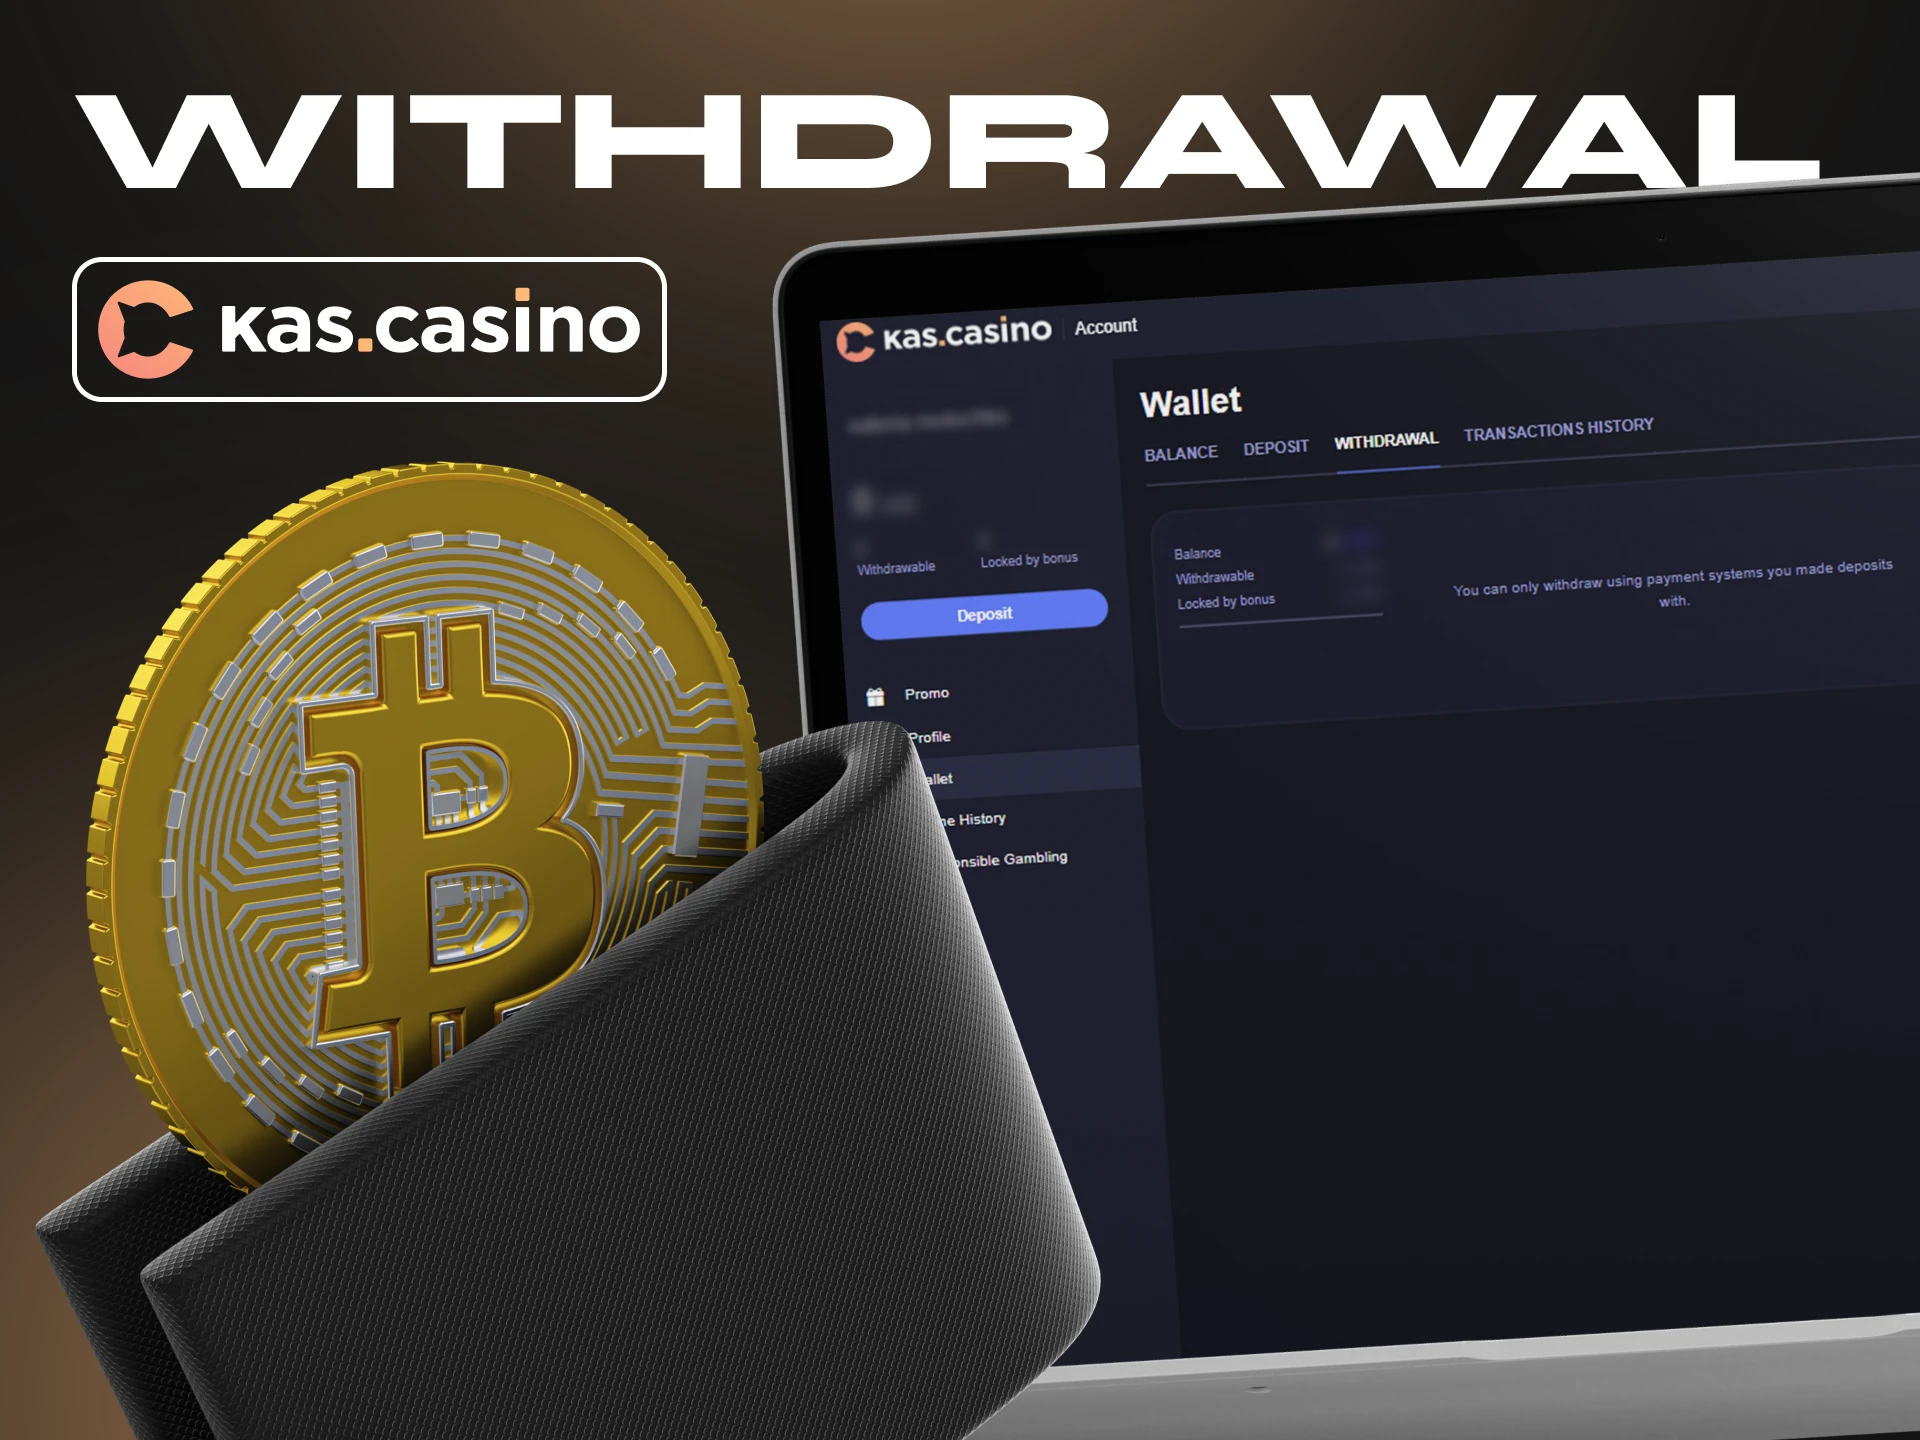 Find out how to withdraw money from your Kas Casino account.